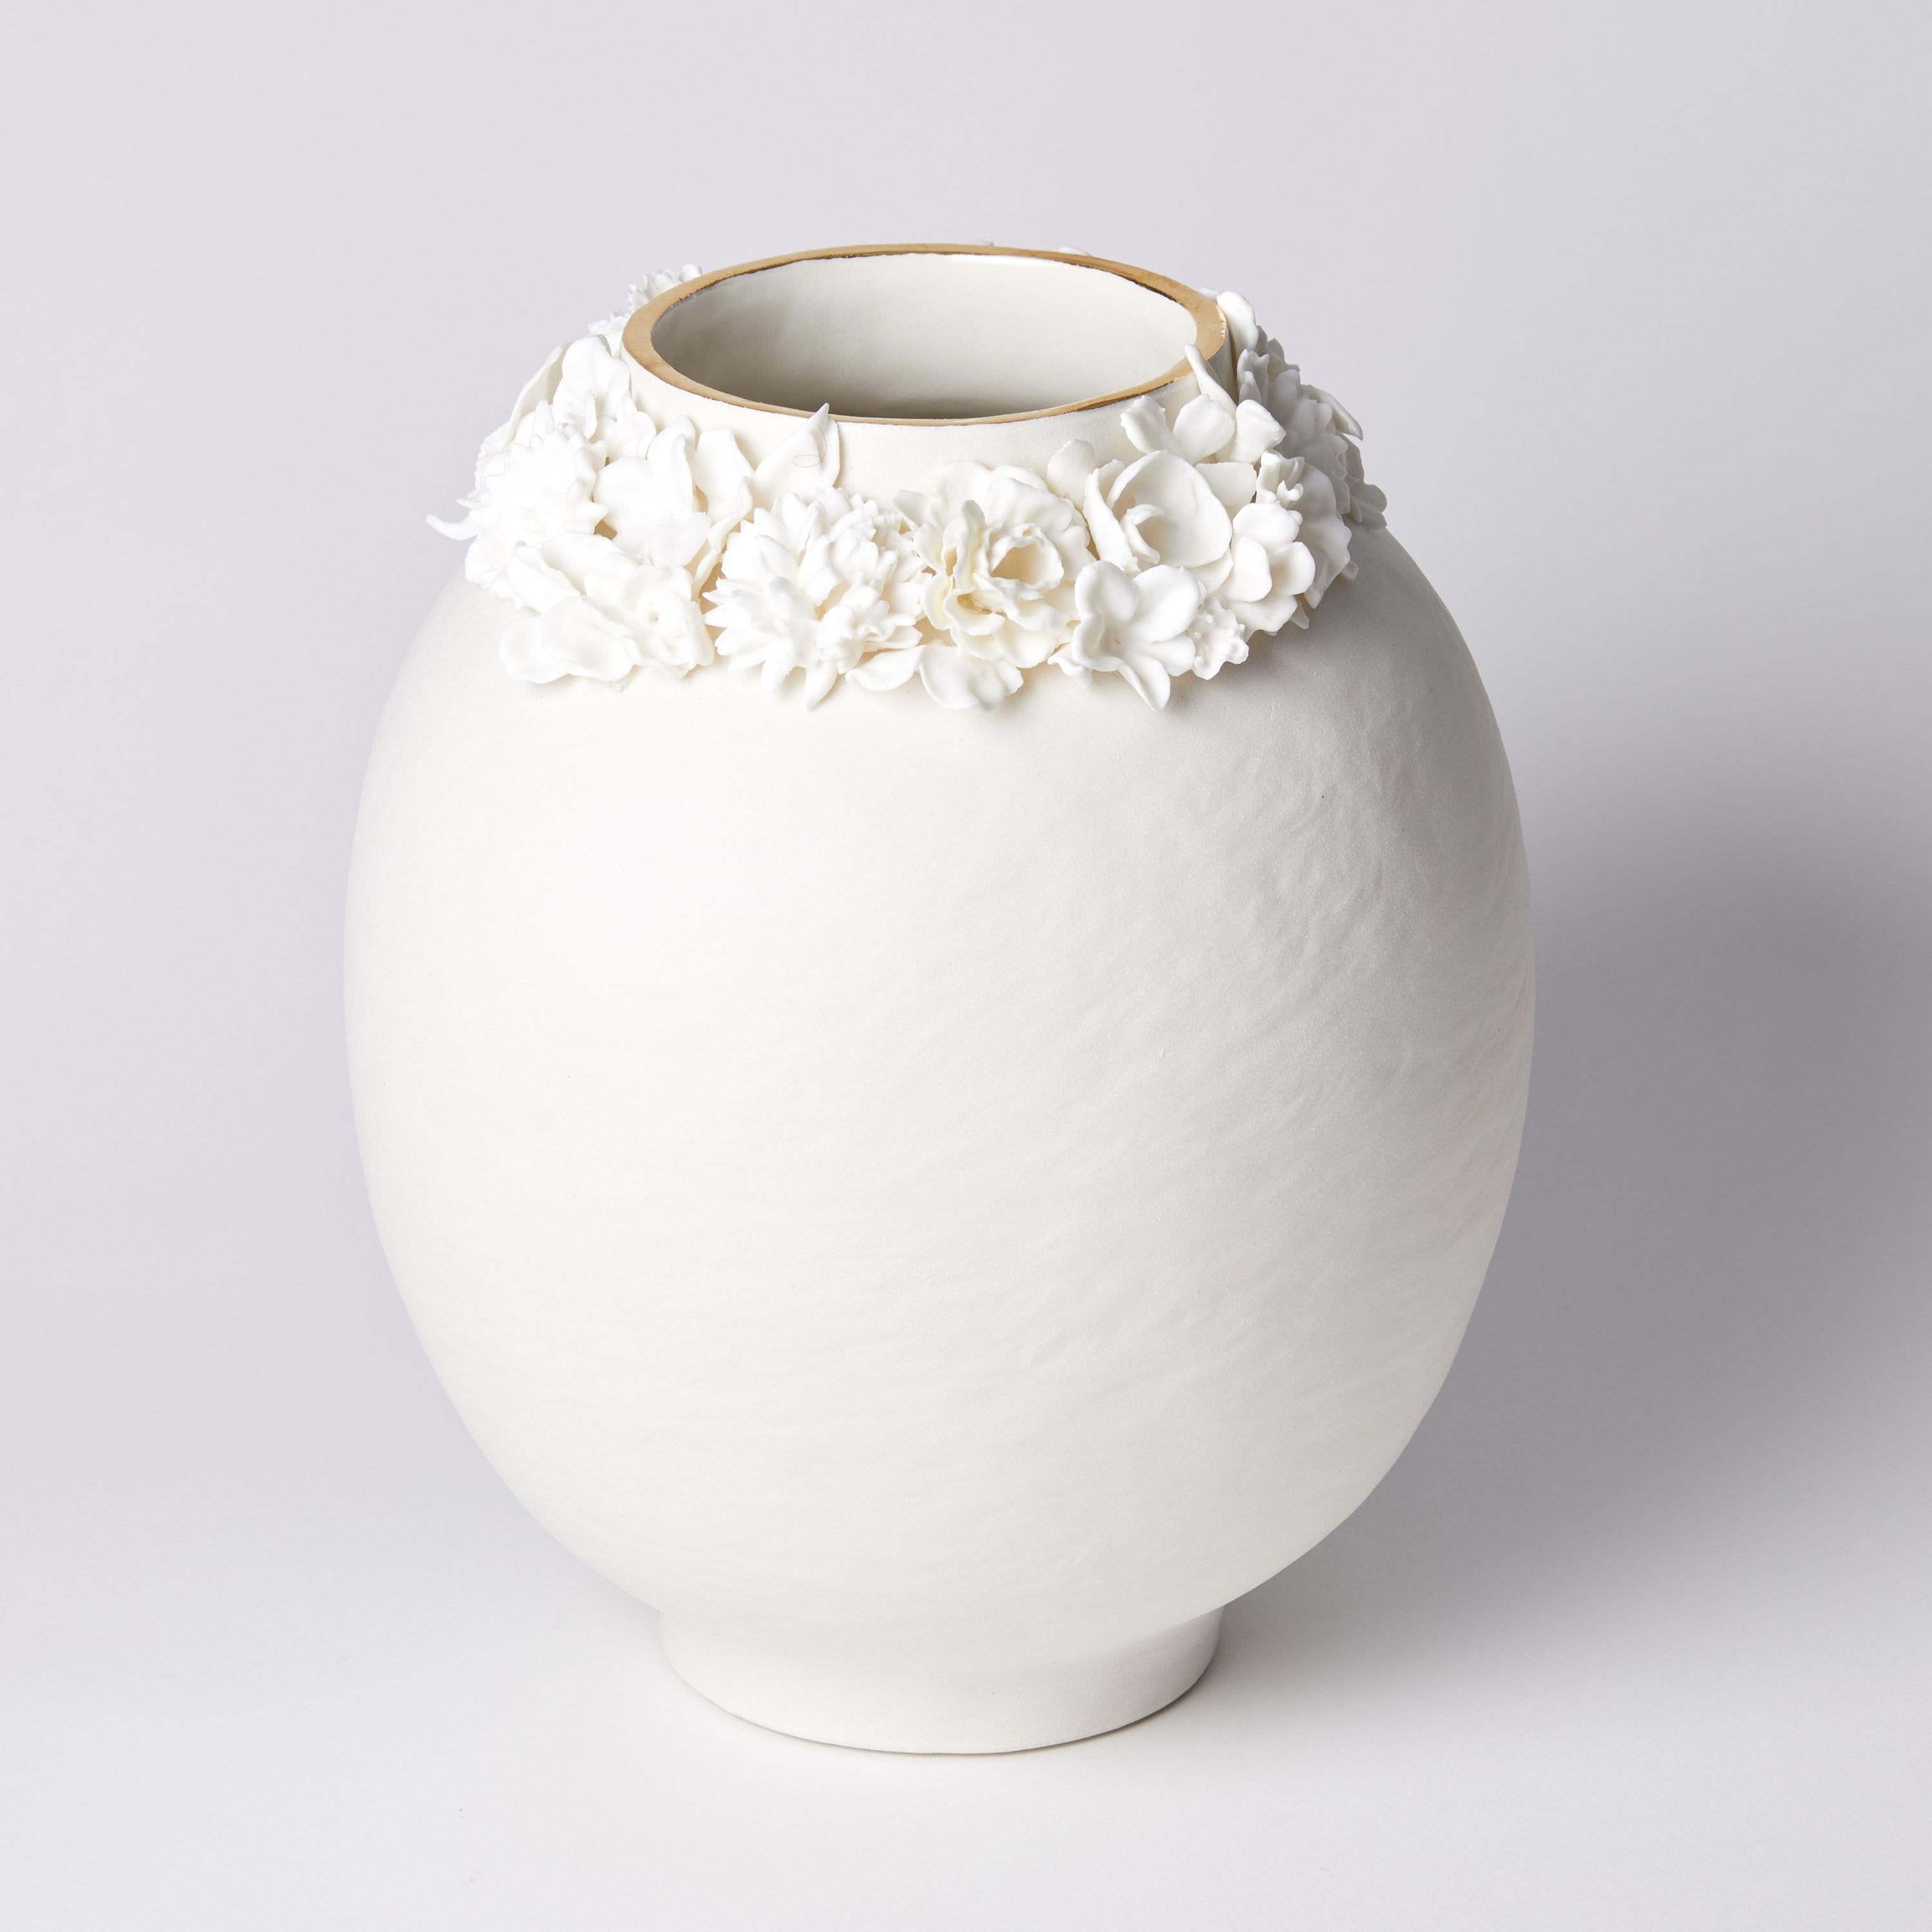 'Forget Me Not VIII' is a unique porcelain sculptural vessel by the British artist, Amy Hughes.

Originally from West Yorkshire, Amy Hughes lives and works in London. She shares a studio with 10 of her former students from the Royal College of